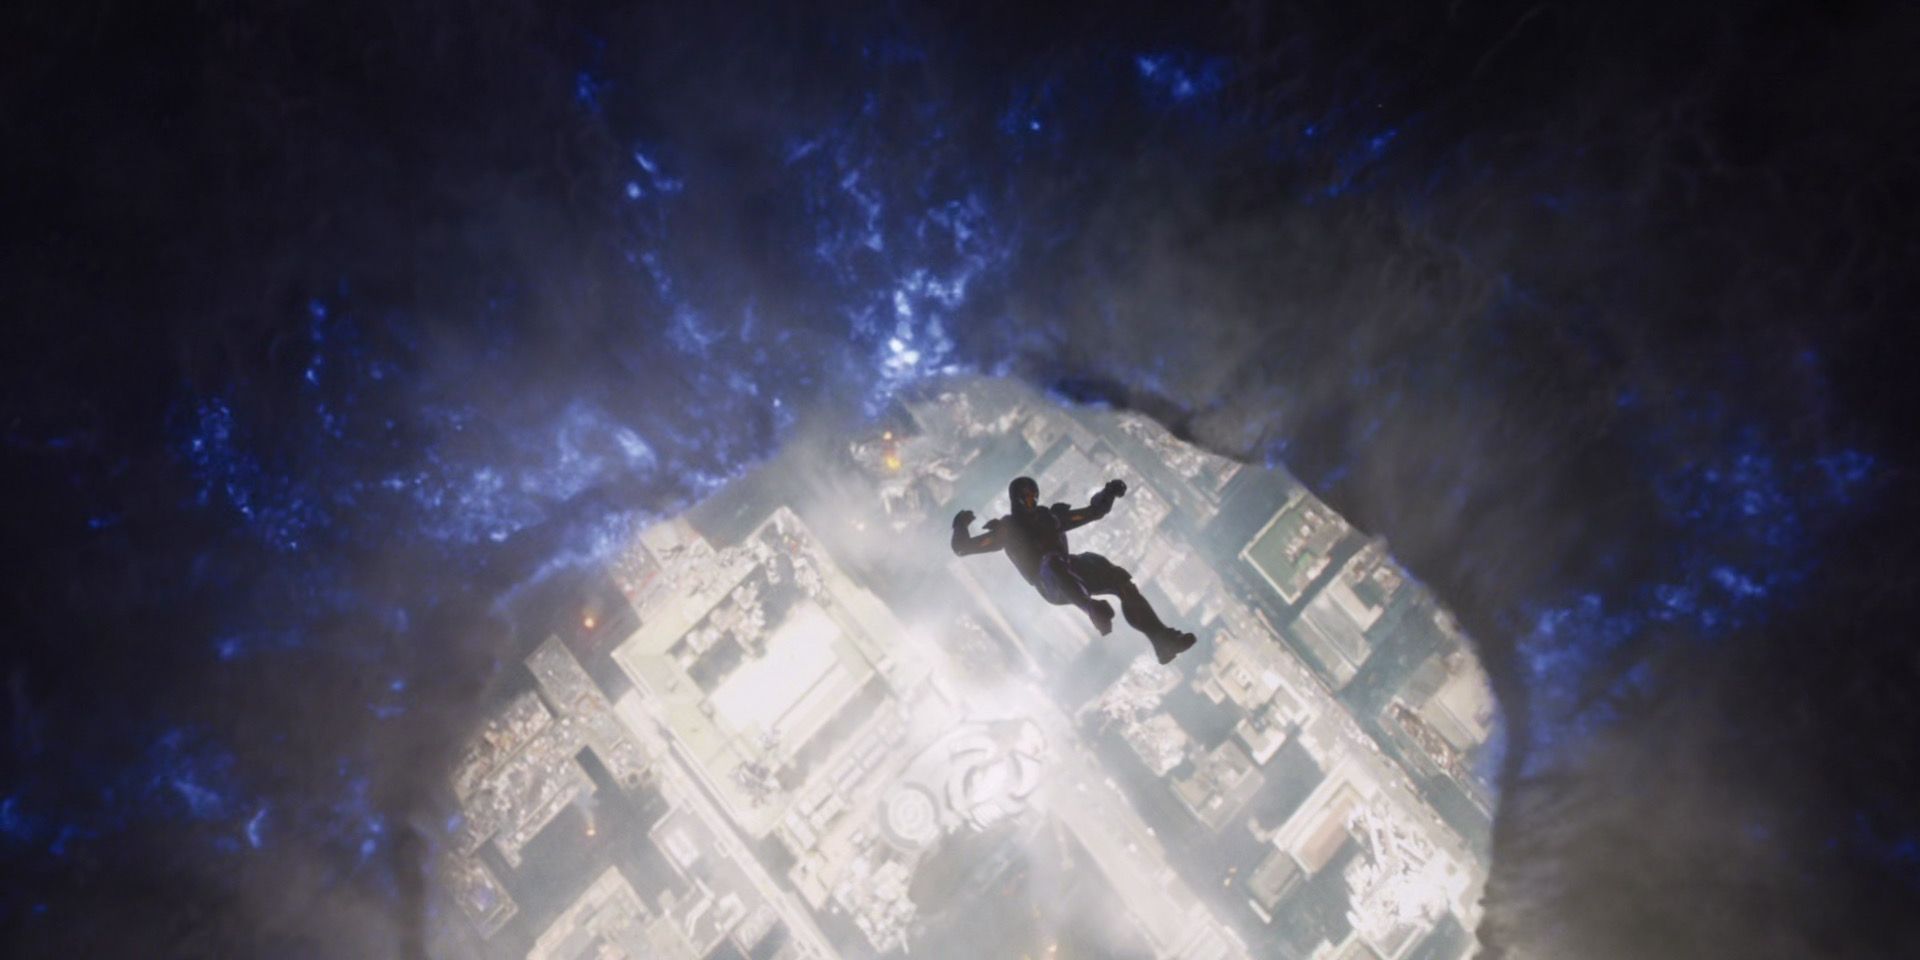 Tony Stark falls through a space portal at the end of Avengers